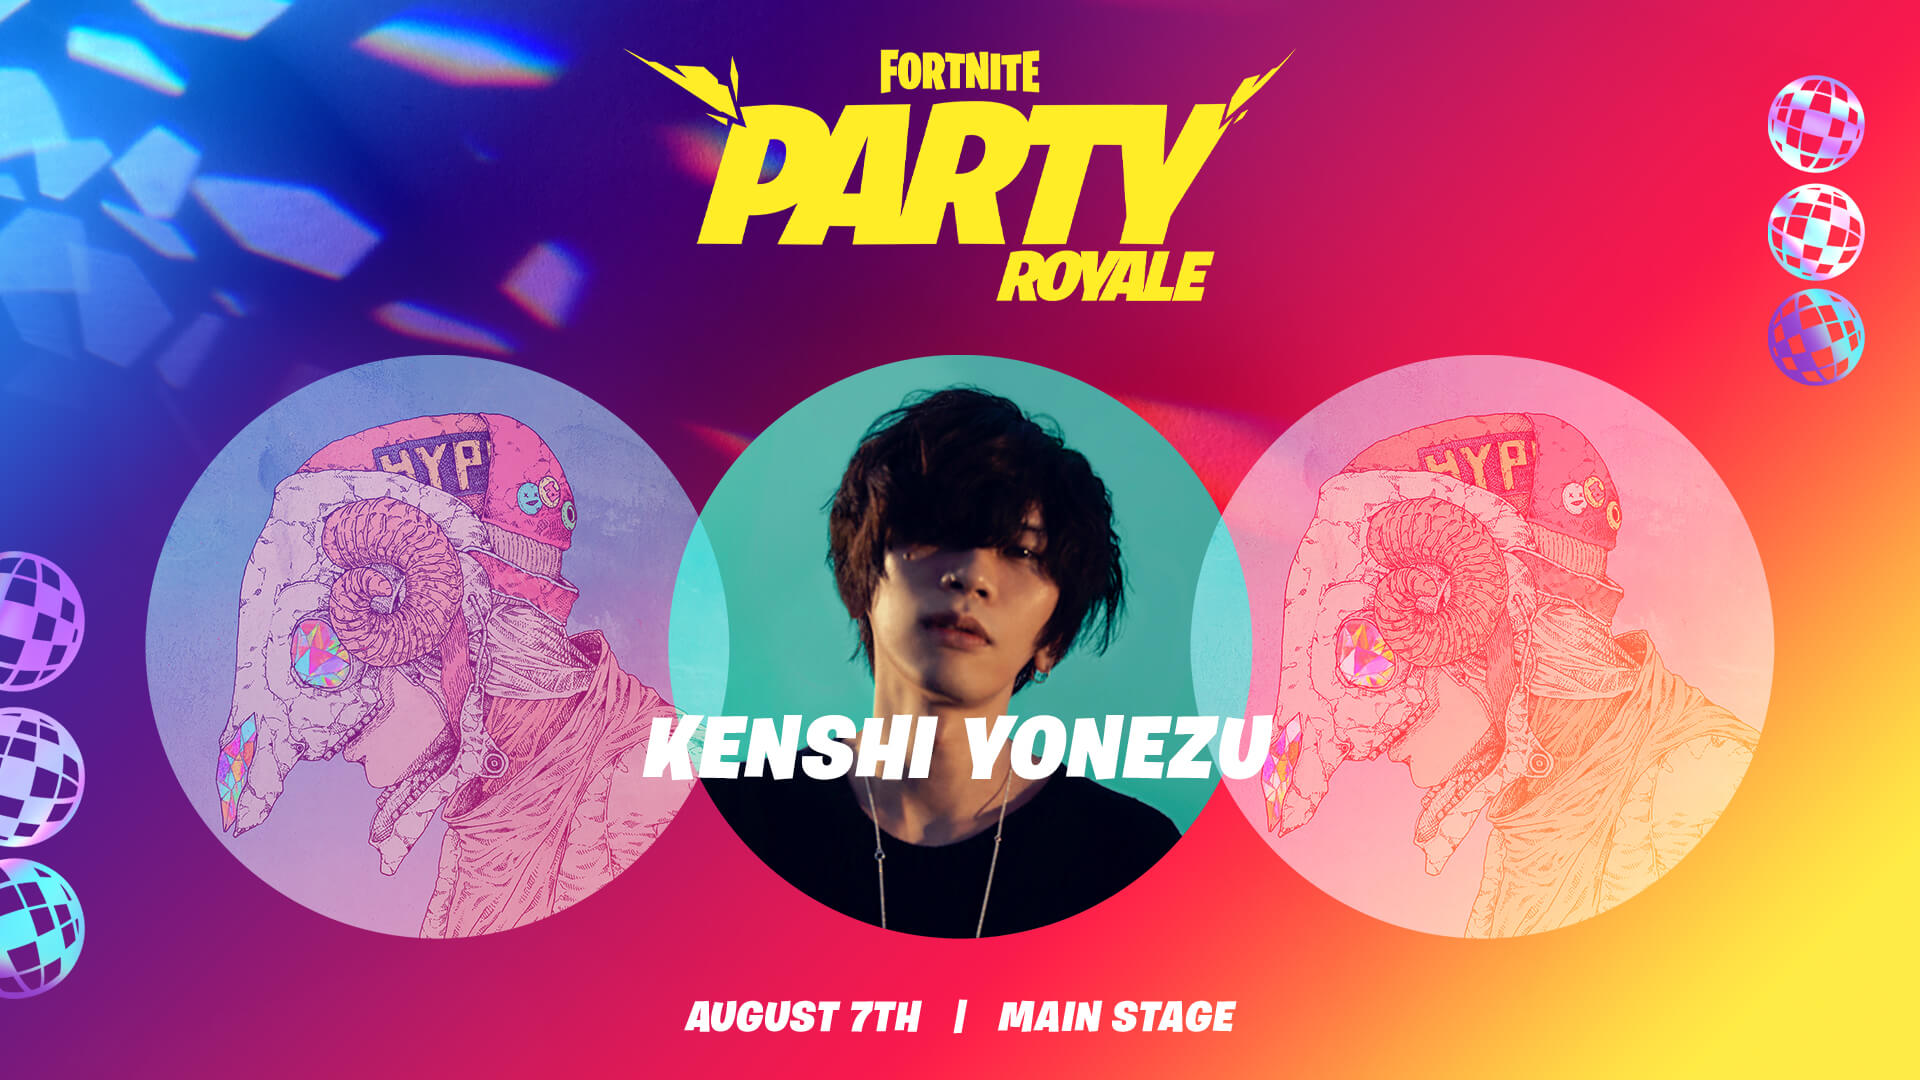 Japanese Singer Kenshi Yonezu Will Be The First Non North American Artist To Have A Party Royale Event In Fortnite Dot Esports